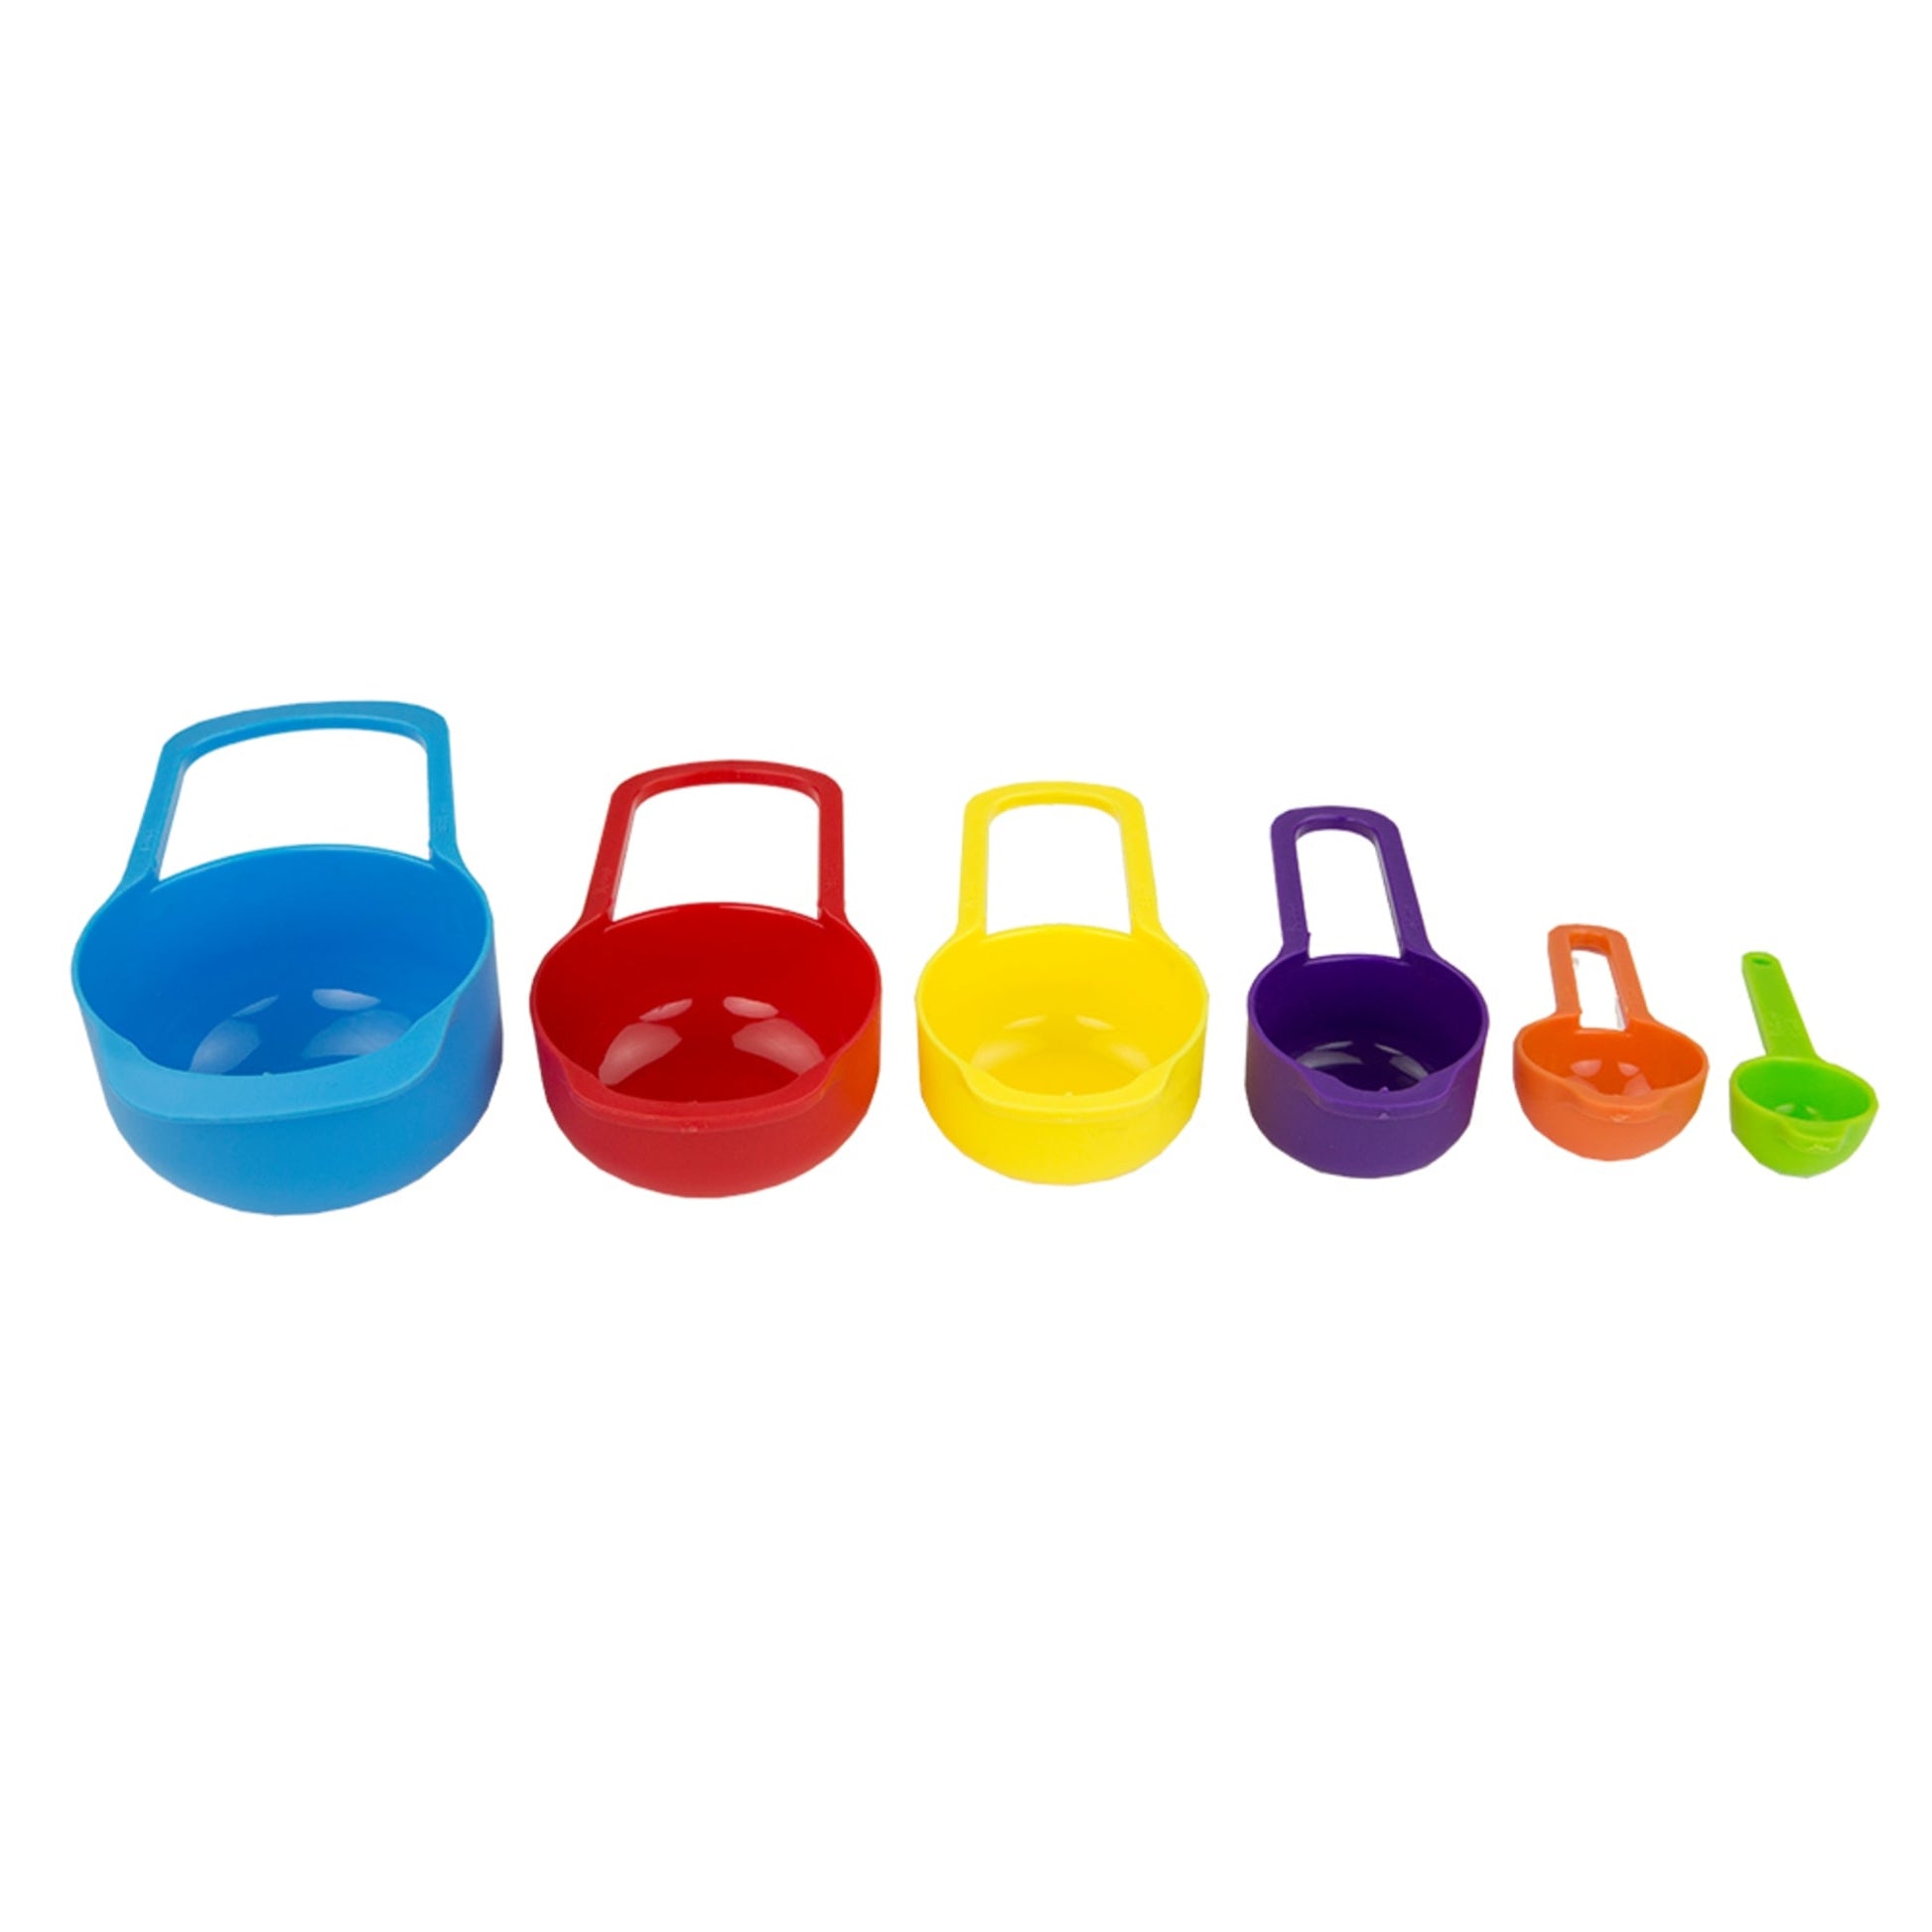 Wholesale 6pc Measuring Cup Set- Assorted Colors PURPLE YELLOW GREEN RED  BLUE ORANGE